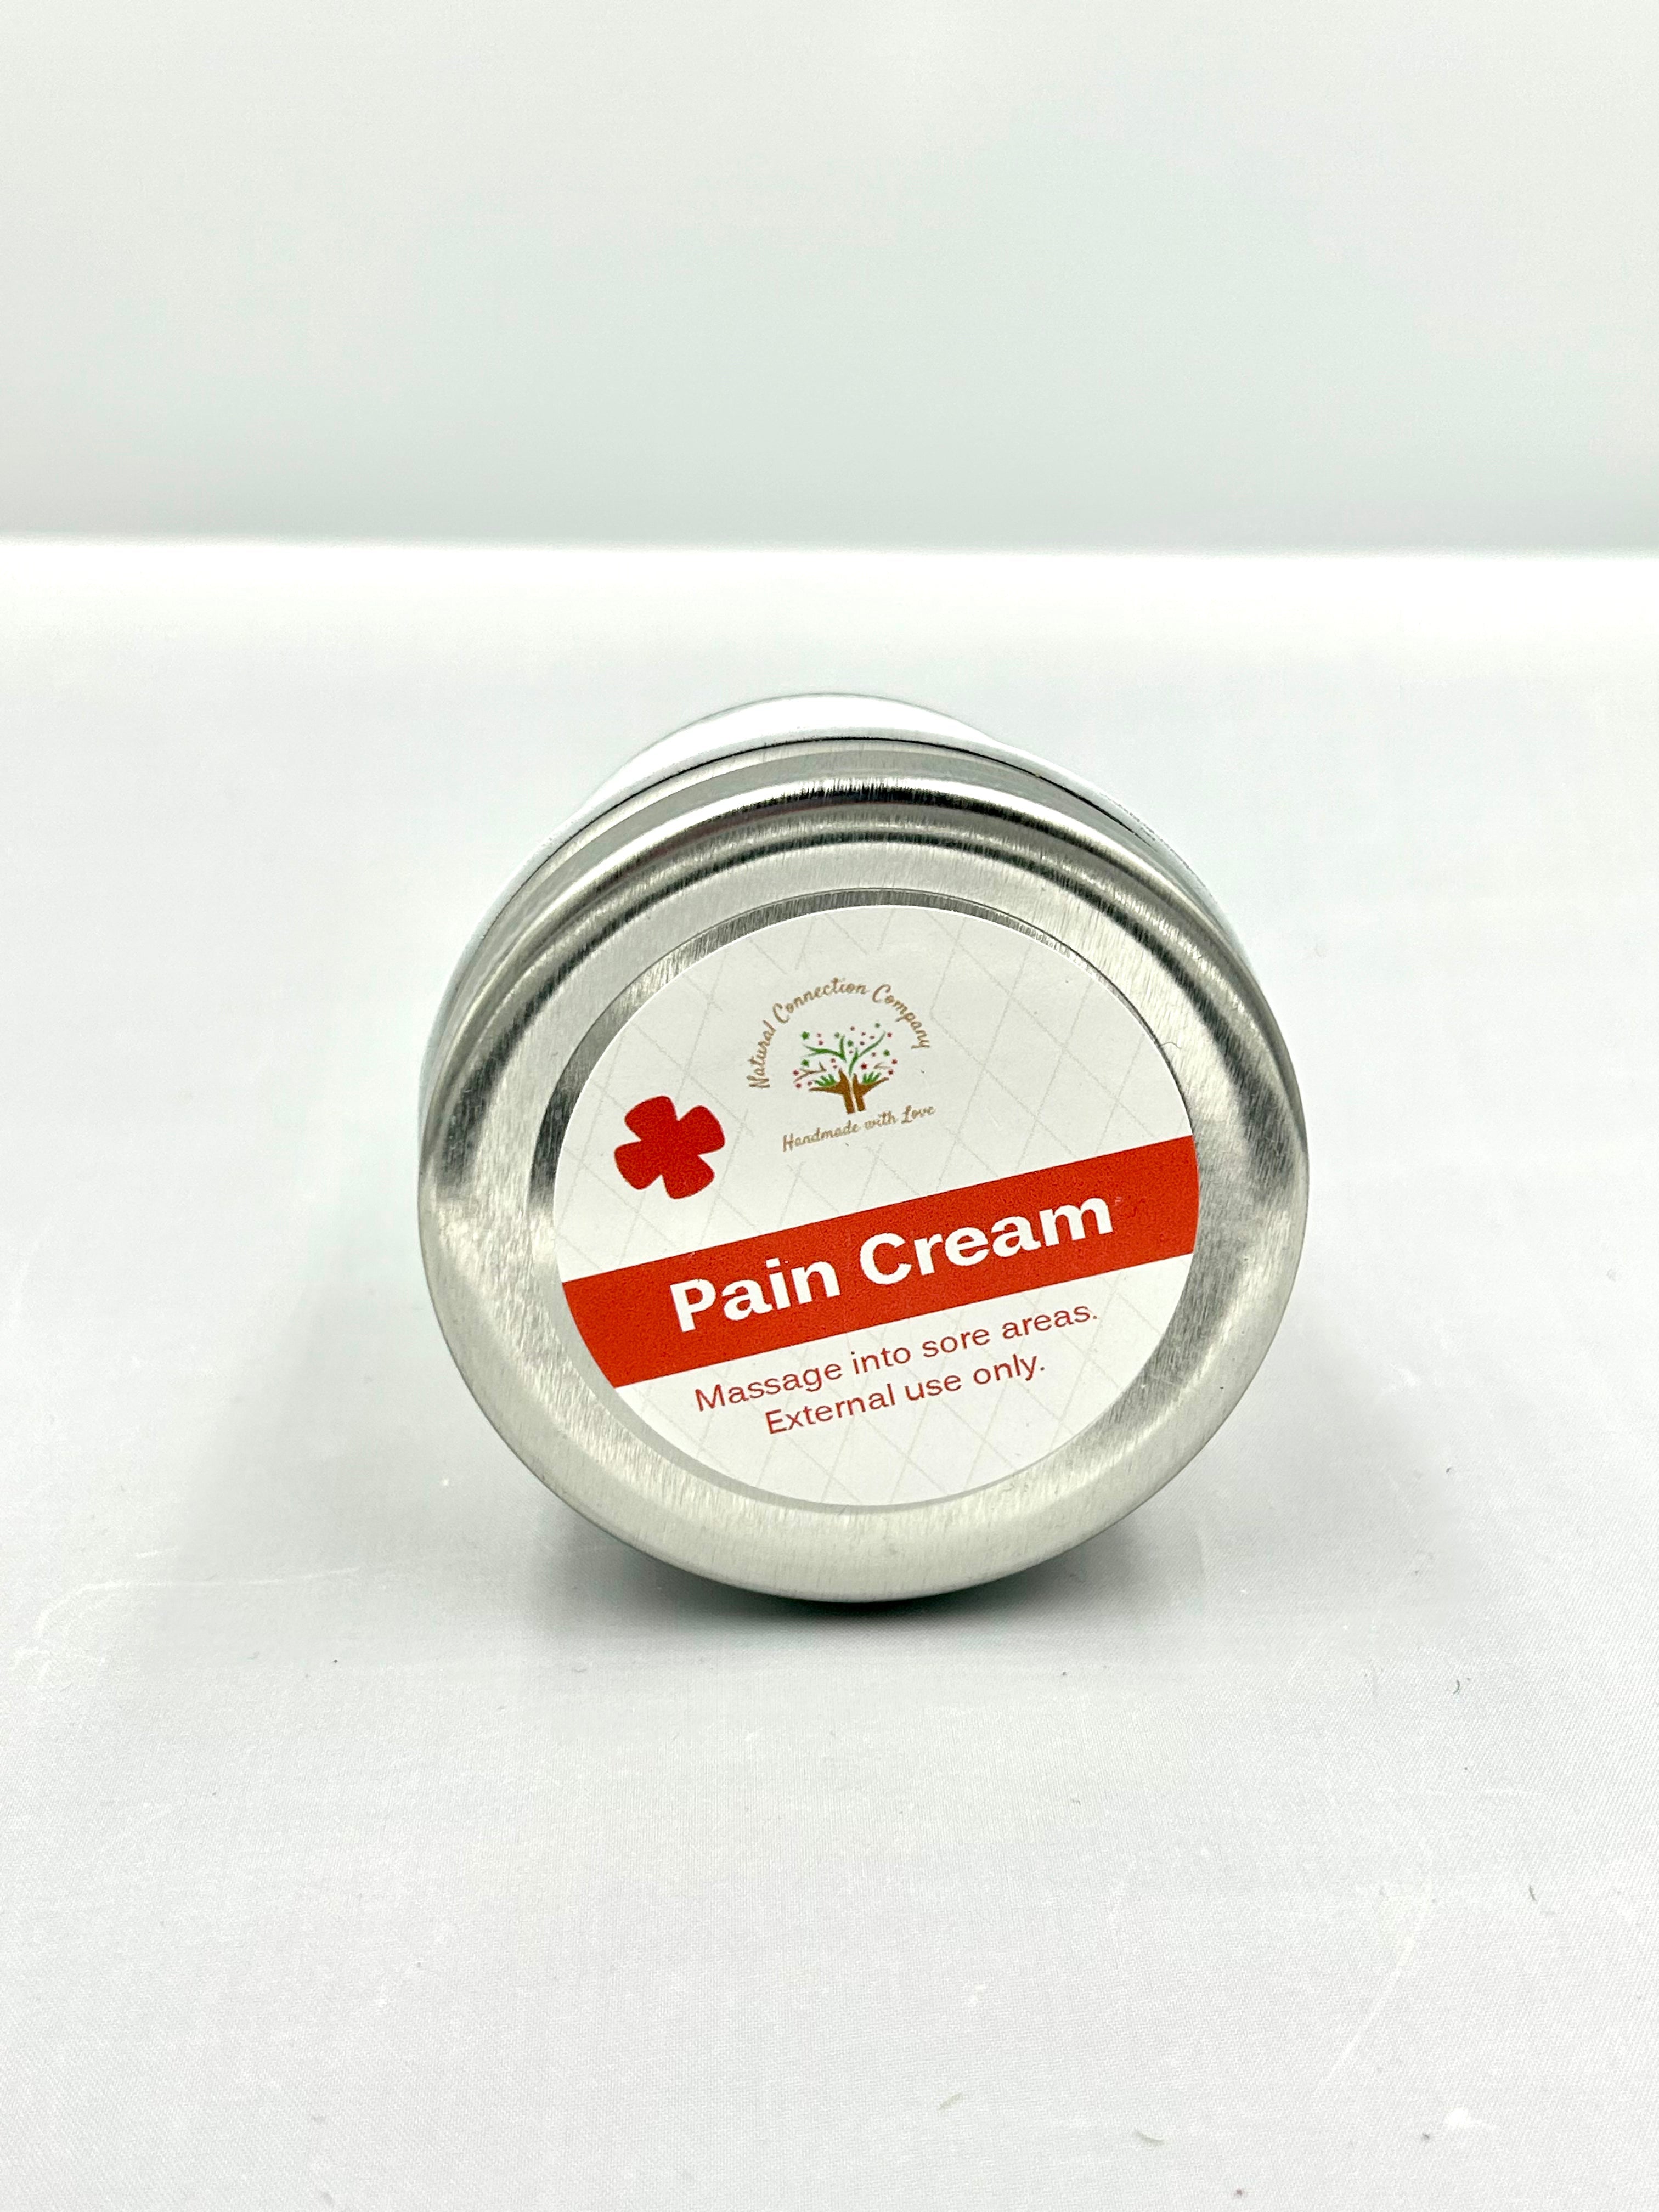 FORGET PAIN - Cream & More